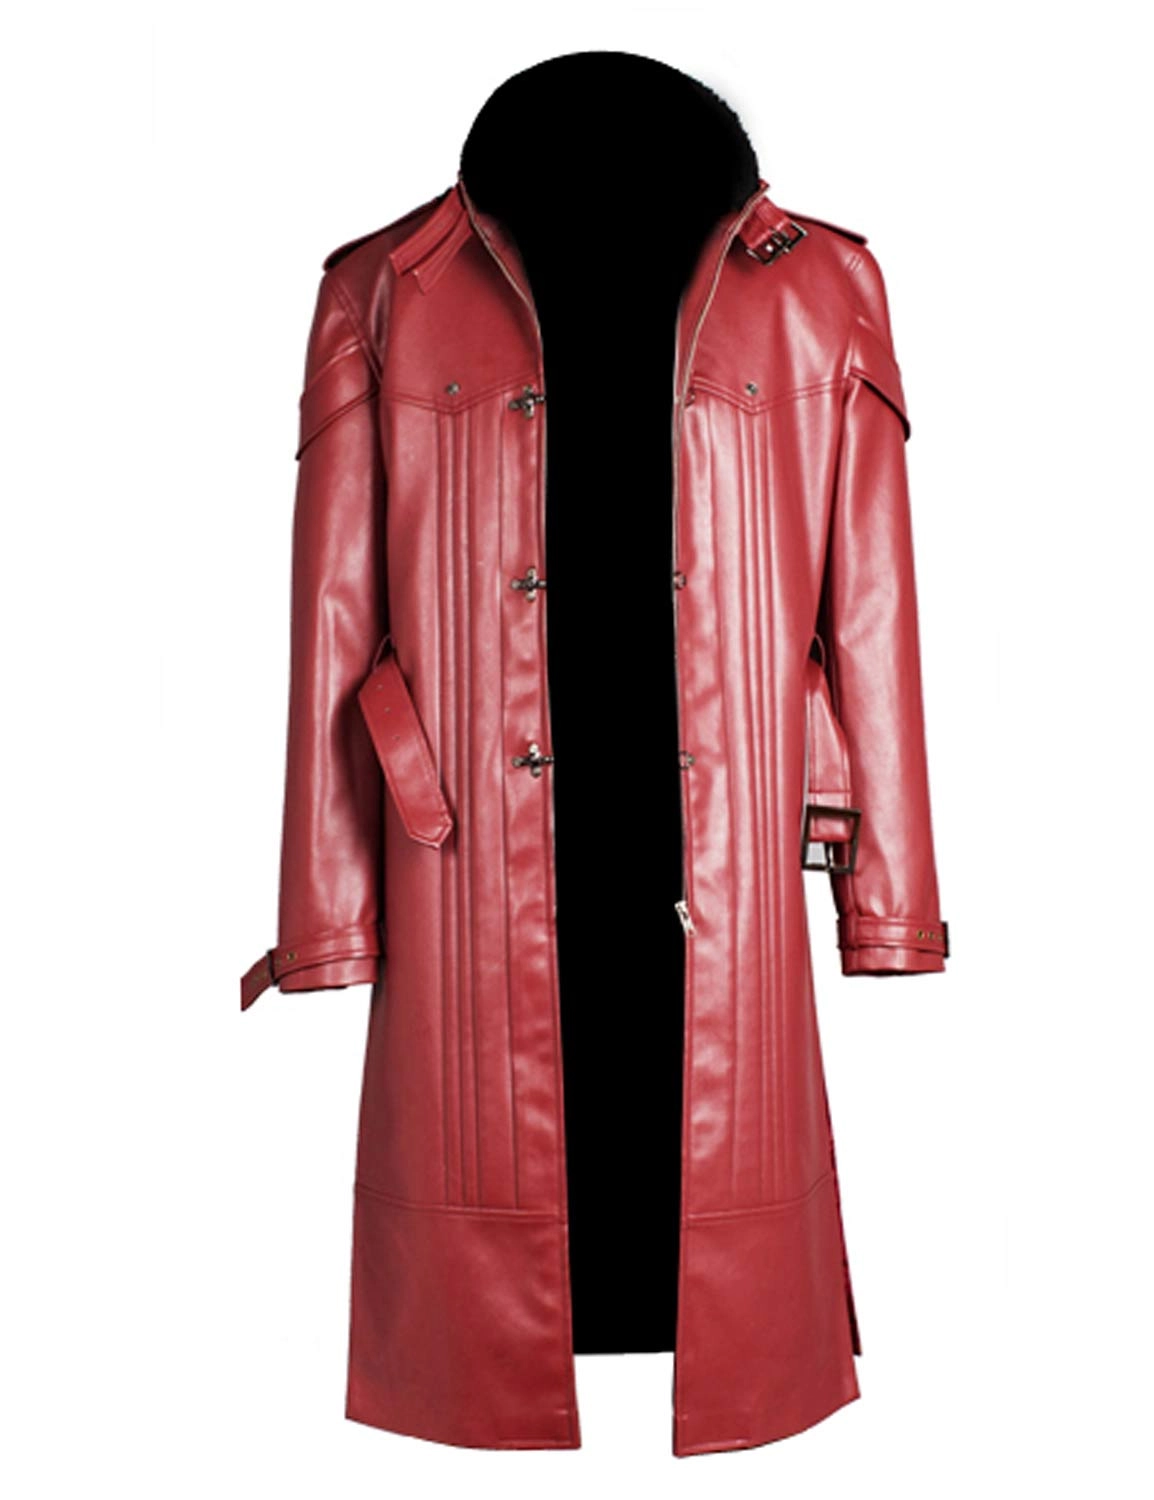 Details about   King of Fighters XIV KOF 14 Iori Yagami Cosplay Costume Outfit Uniform Red Coat 